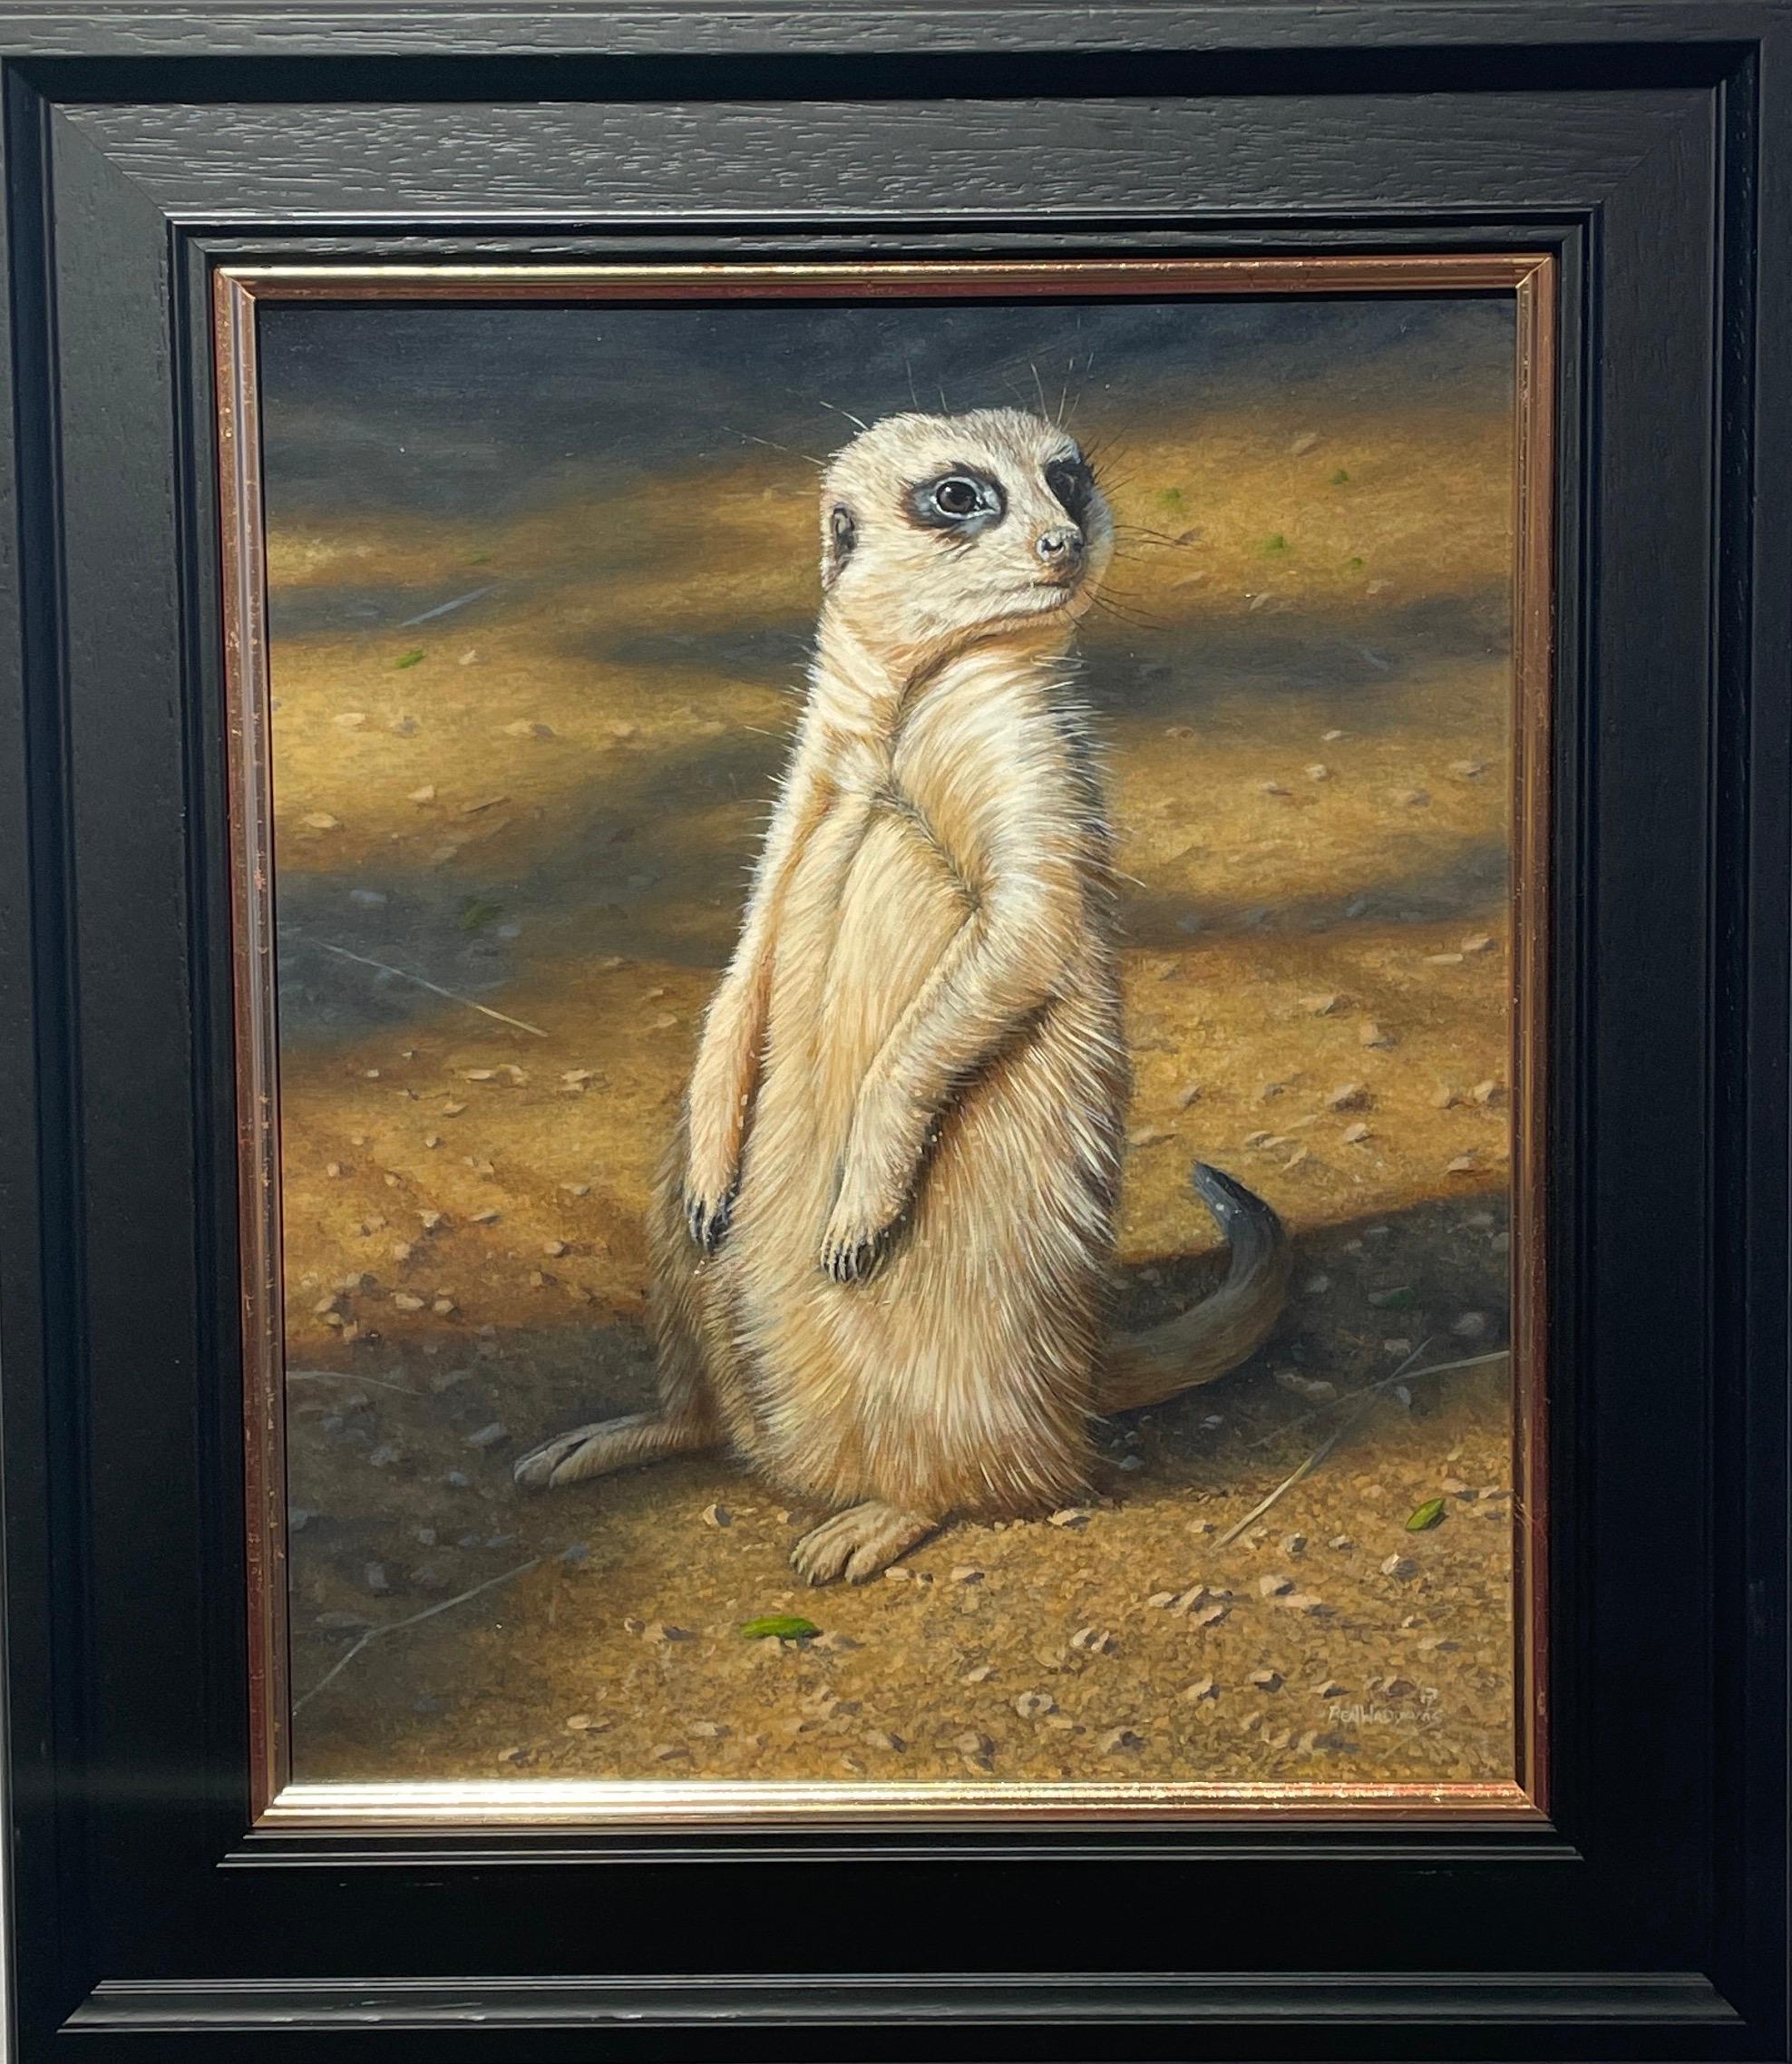 'The Sun Worshipper' Contemporary photorealist painting of a Meerkat in the wild - Painting by Ben Waddams